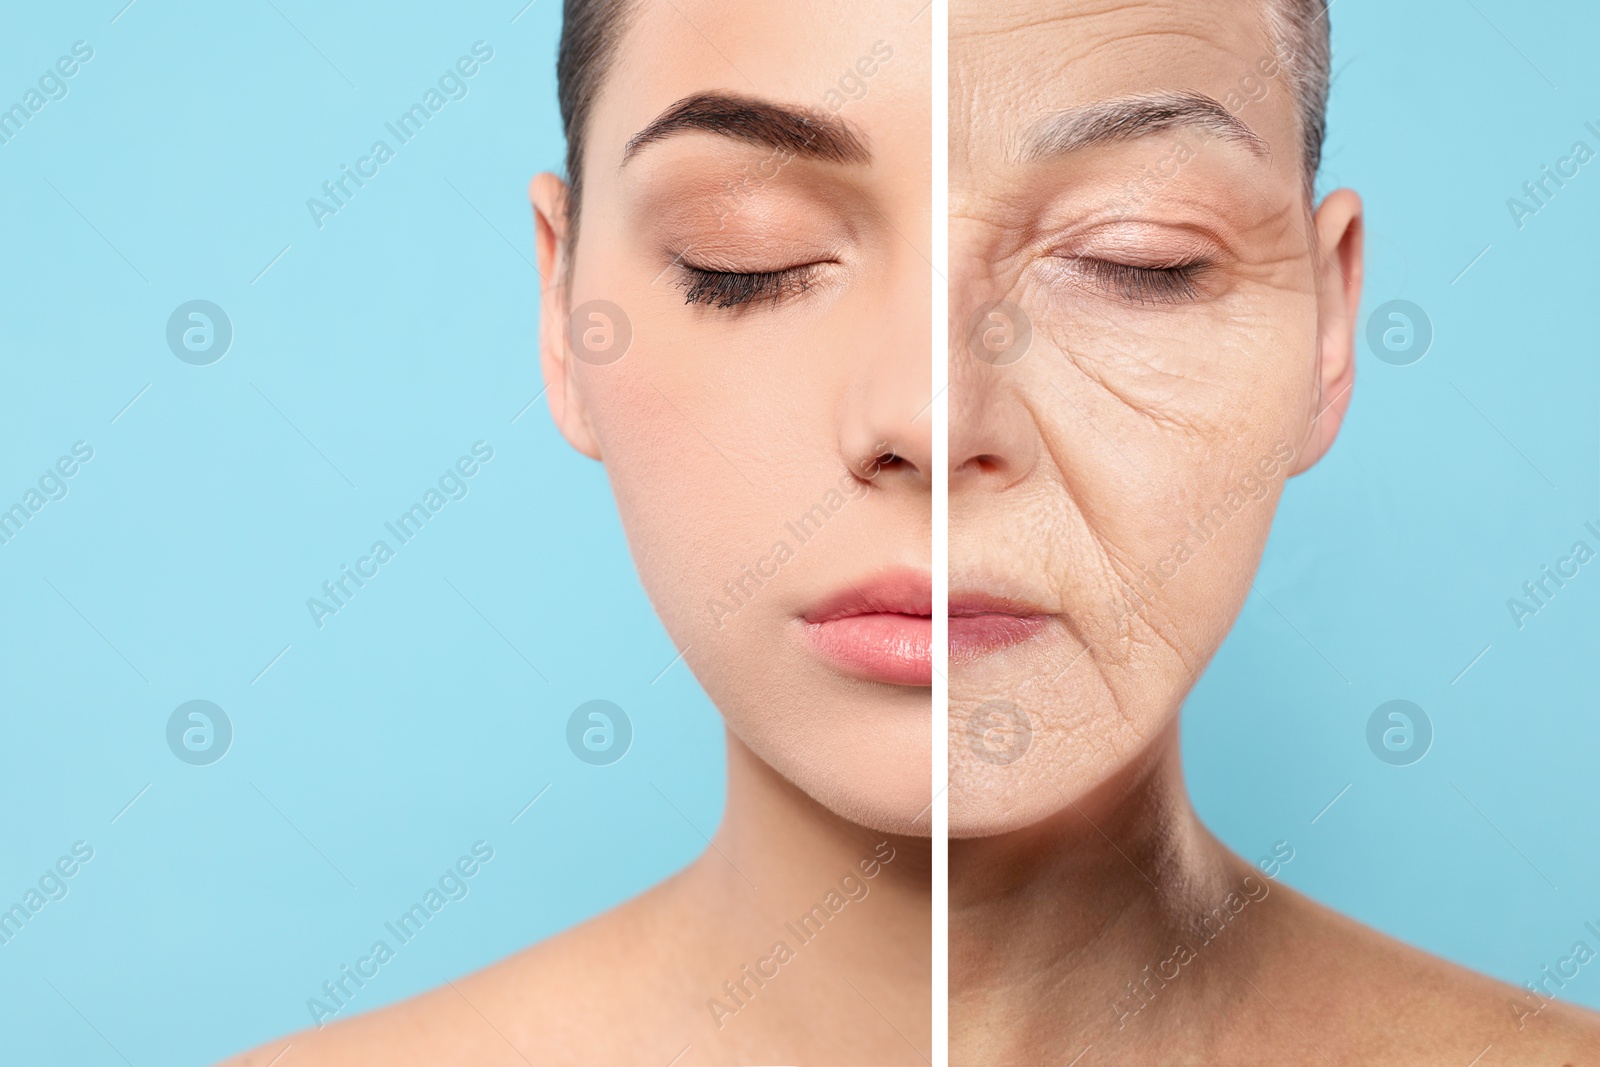 Image of Changes in appearance during aging. Portrait of woman divided in half to show her in younger and older ages. Collage design on light blue background